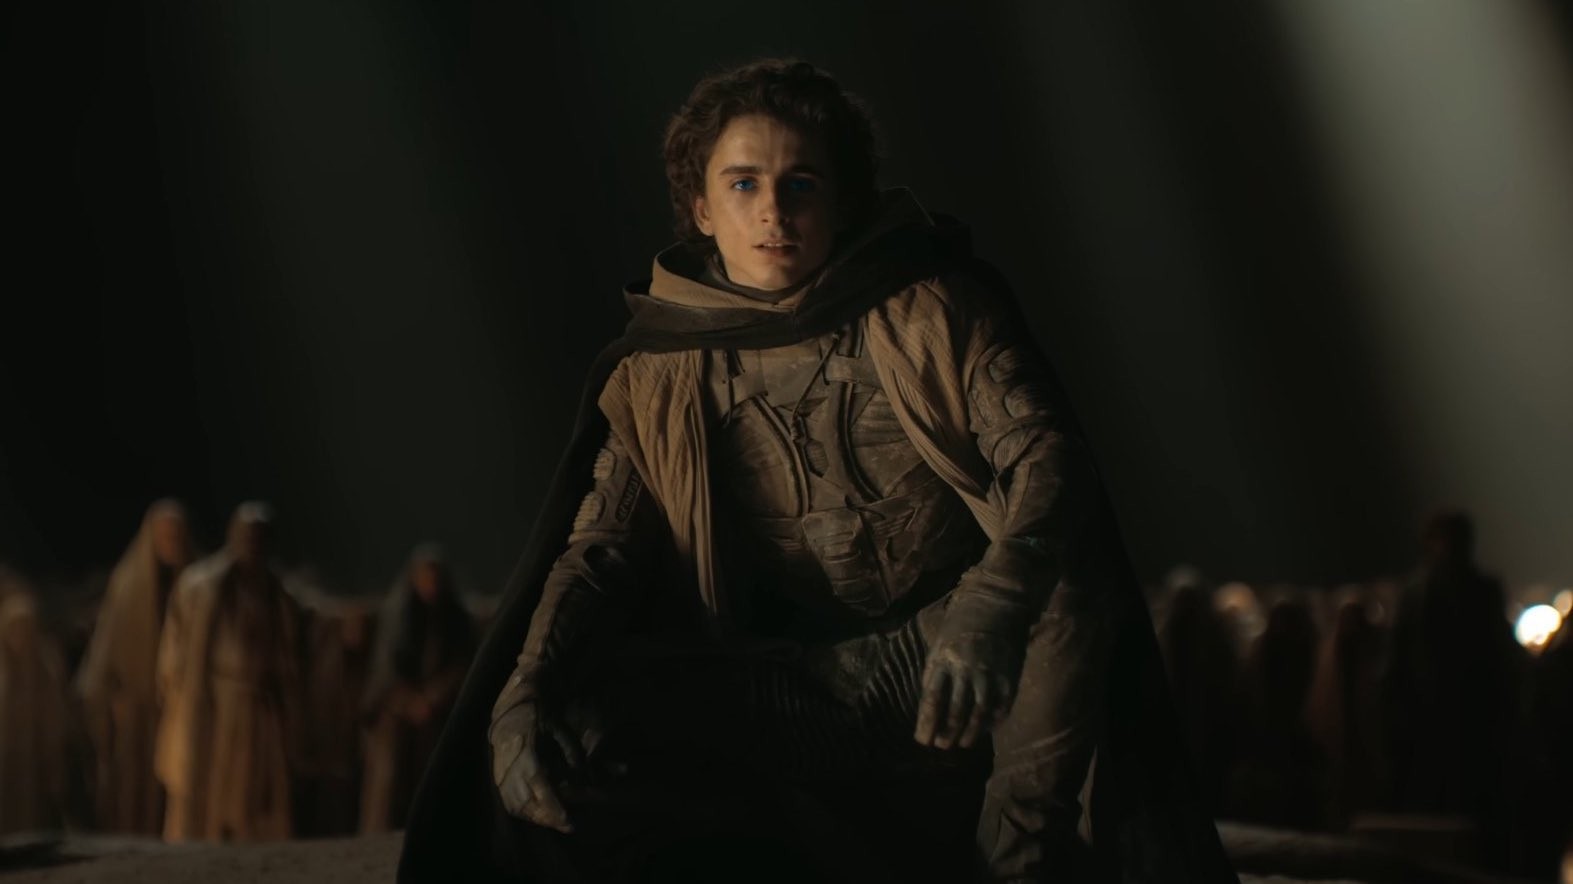 Timothée Chalamet's Dune: Part 2 has been going strong at the box office as it now approaches another milestone